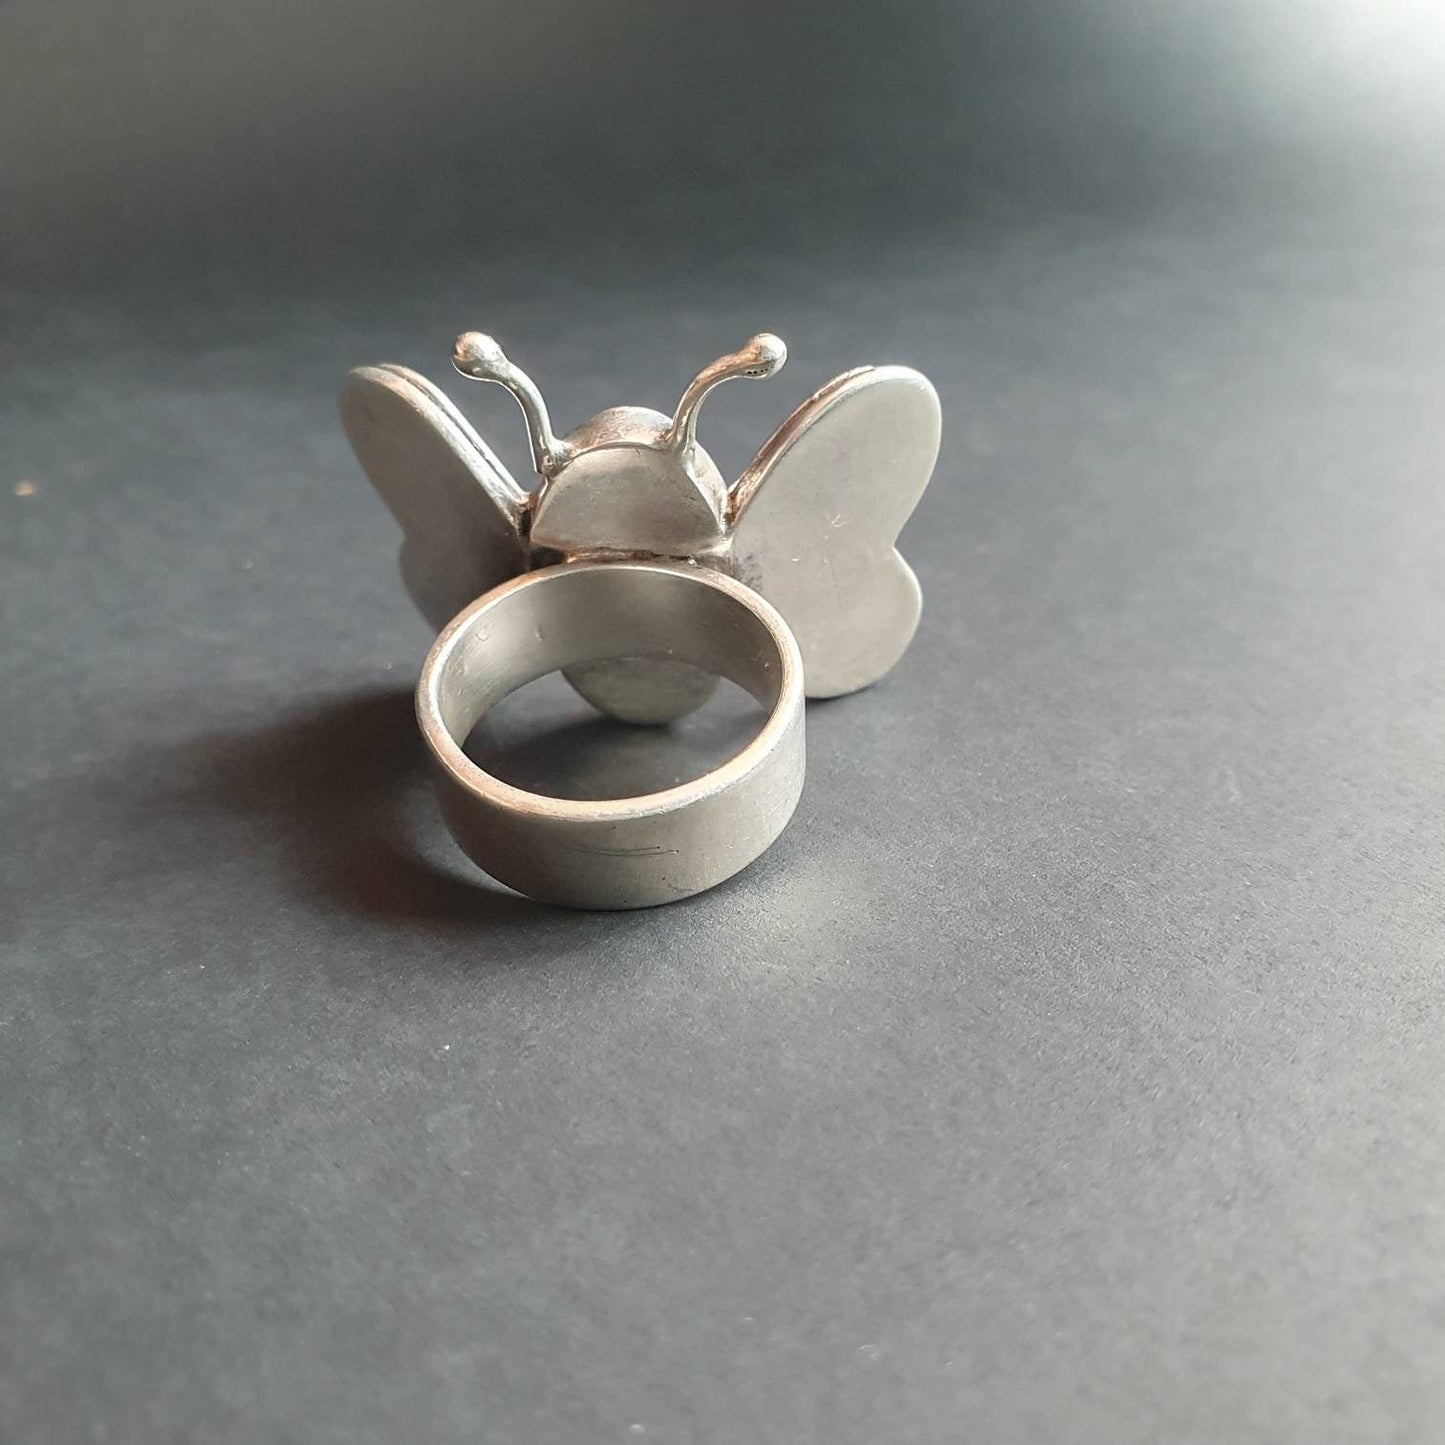 Butterfly jewellery, Butterfly ring rose quartz gemstone, sterling silver Butterfly large chunky statement ring, funky vibe eccentric style